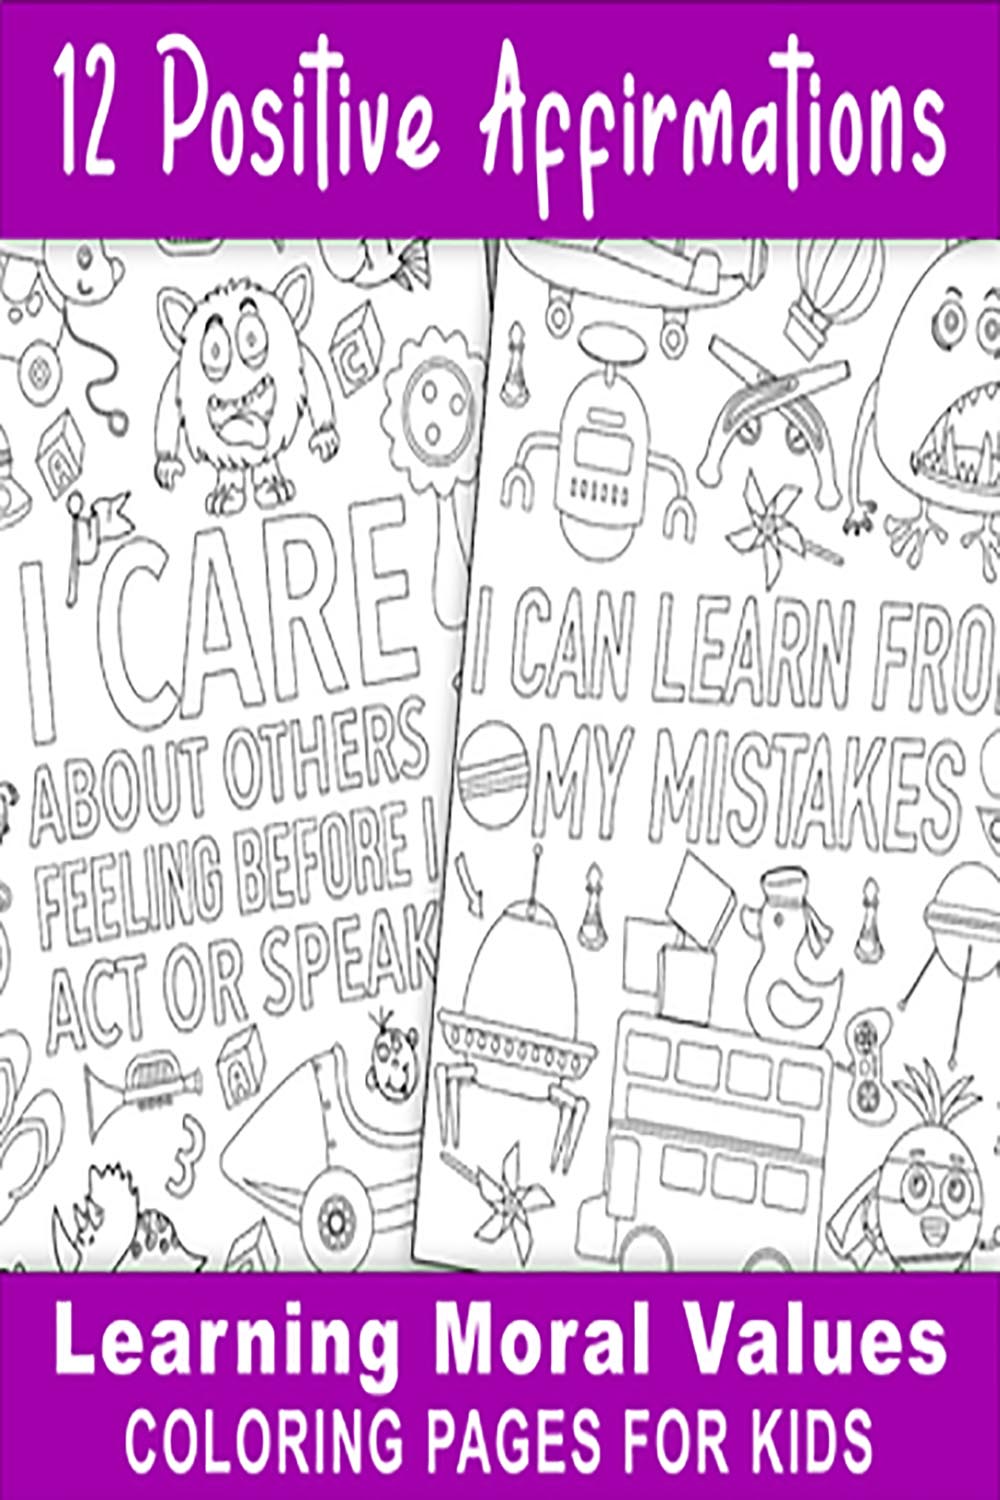 12 Positive Affirmation Colouring Pages for Kids - Learning Moral Values pinterest preview image.